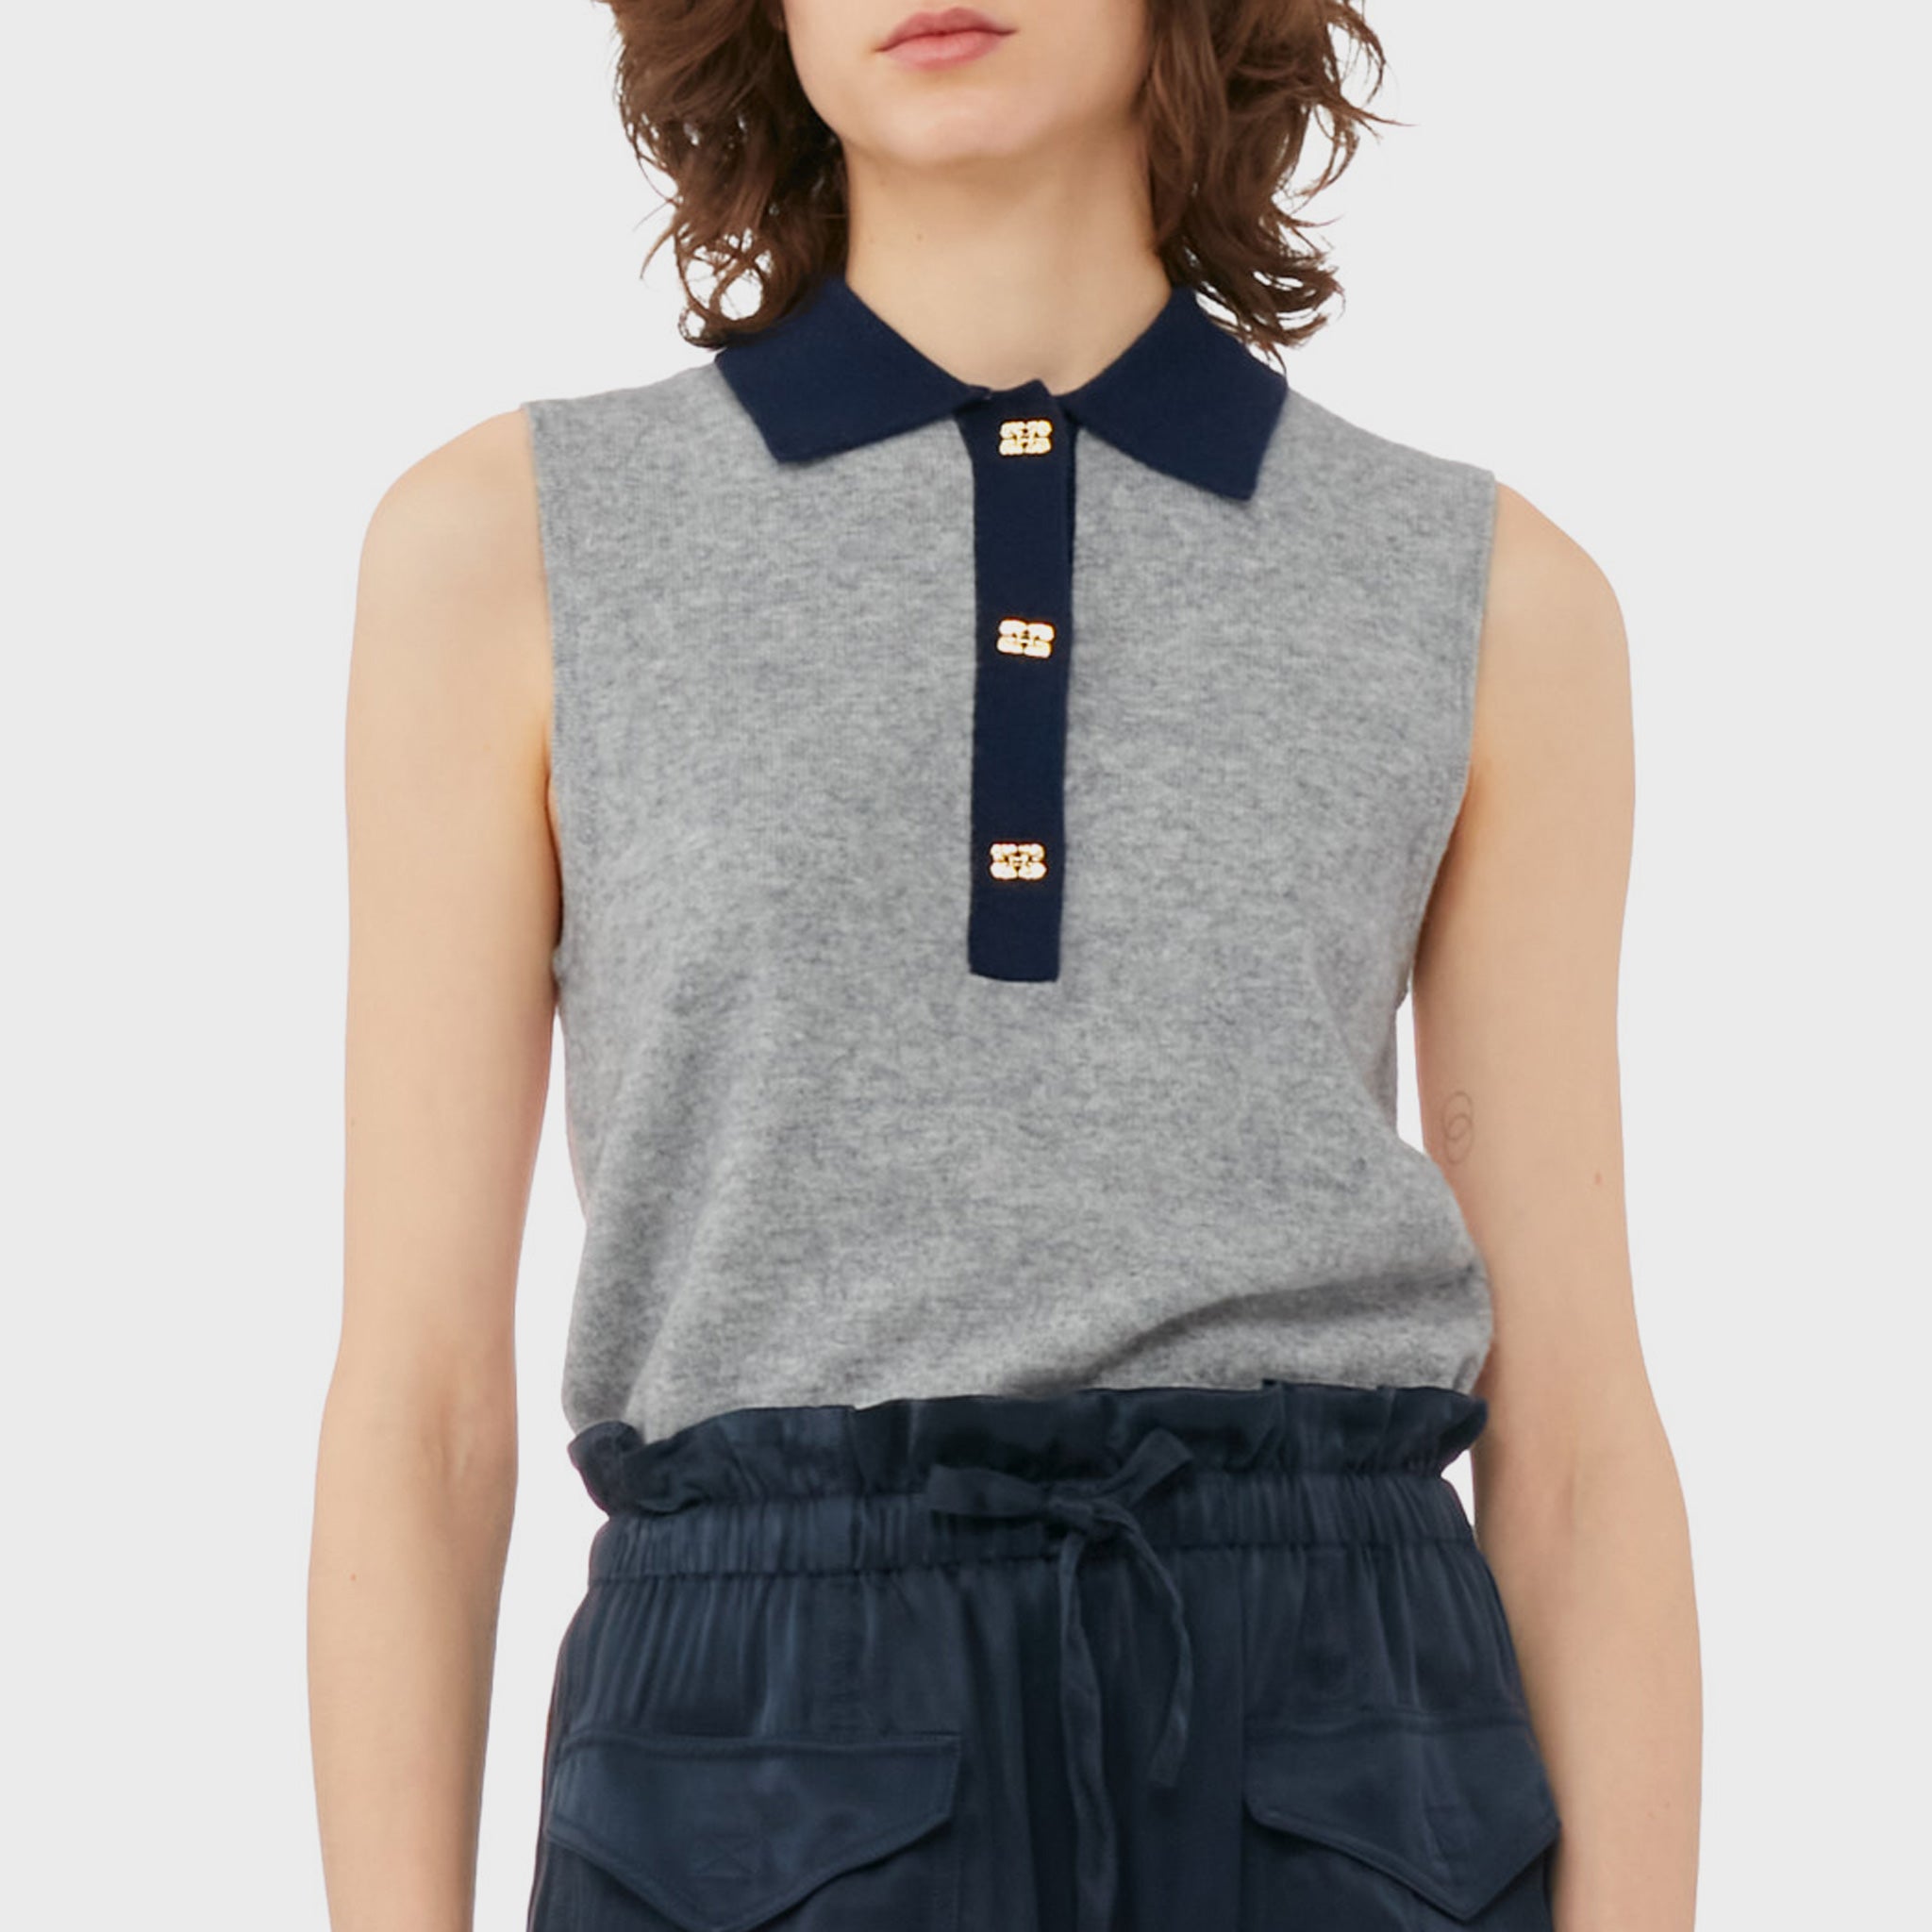 A model wears the frost gray sleeveless polo top with contrasting navy blue collar and gold button hardware.